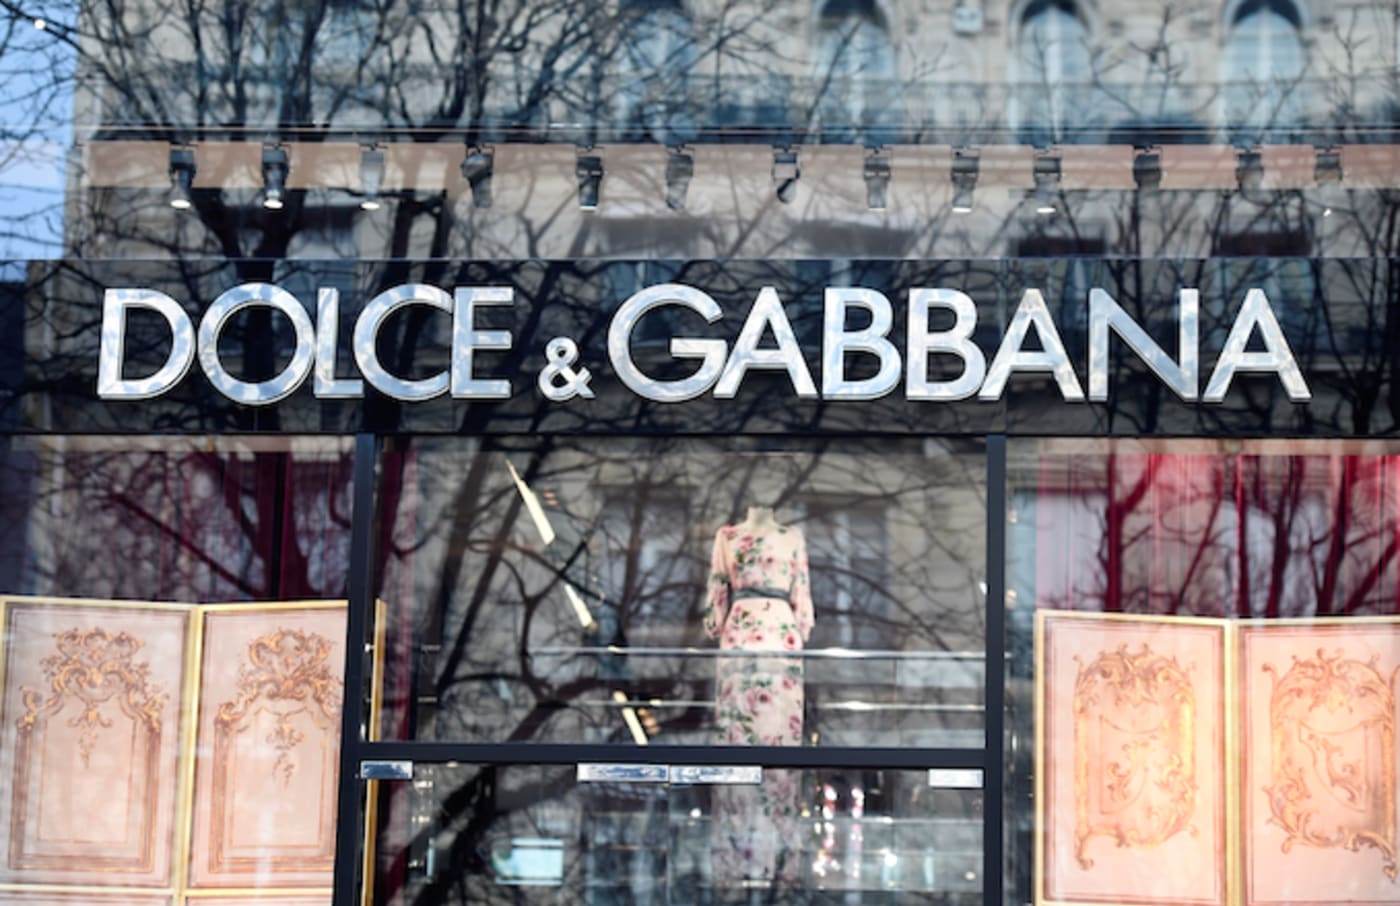 Dolce & Gabbana’s New Chinese Ad Sparks Accusations of Racism | Complex